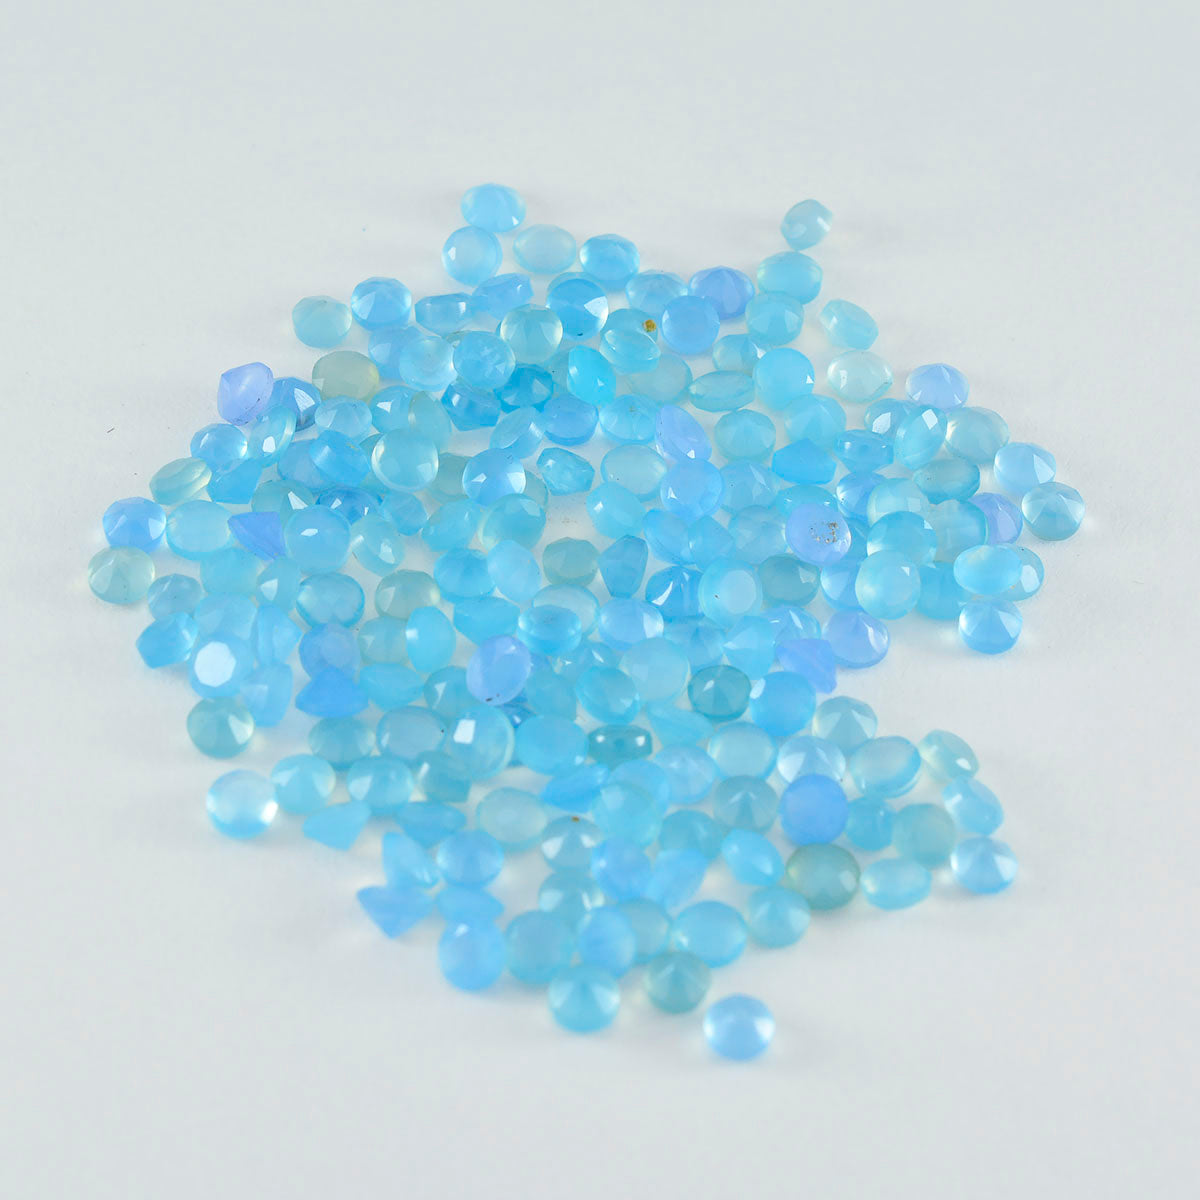 Riyogems 1PC Natural Blue Chalcedony Faceted 3x3 mm Round Shape great Quality Loose Stone